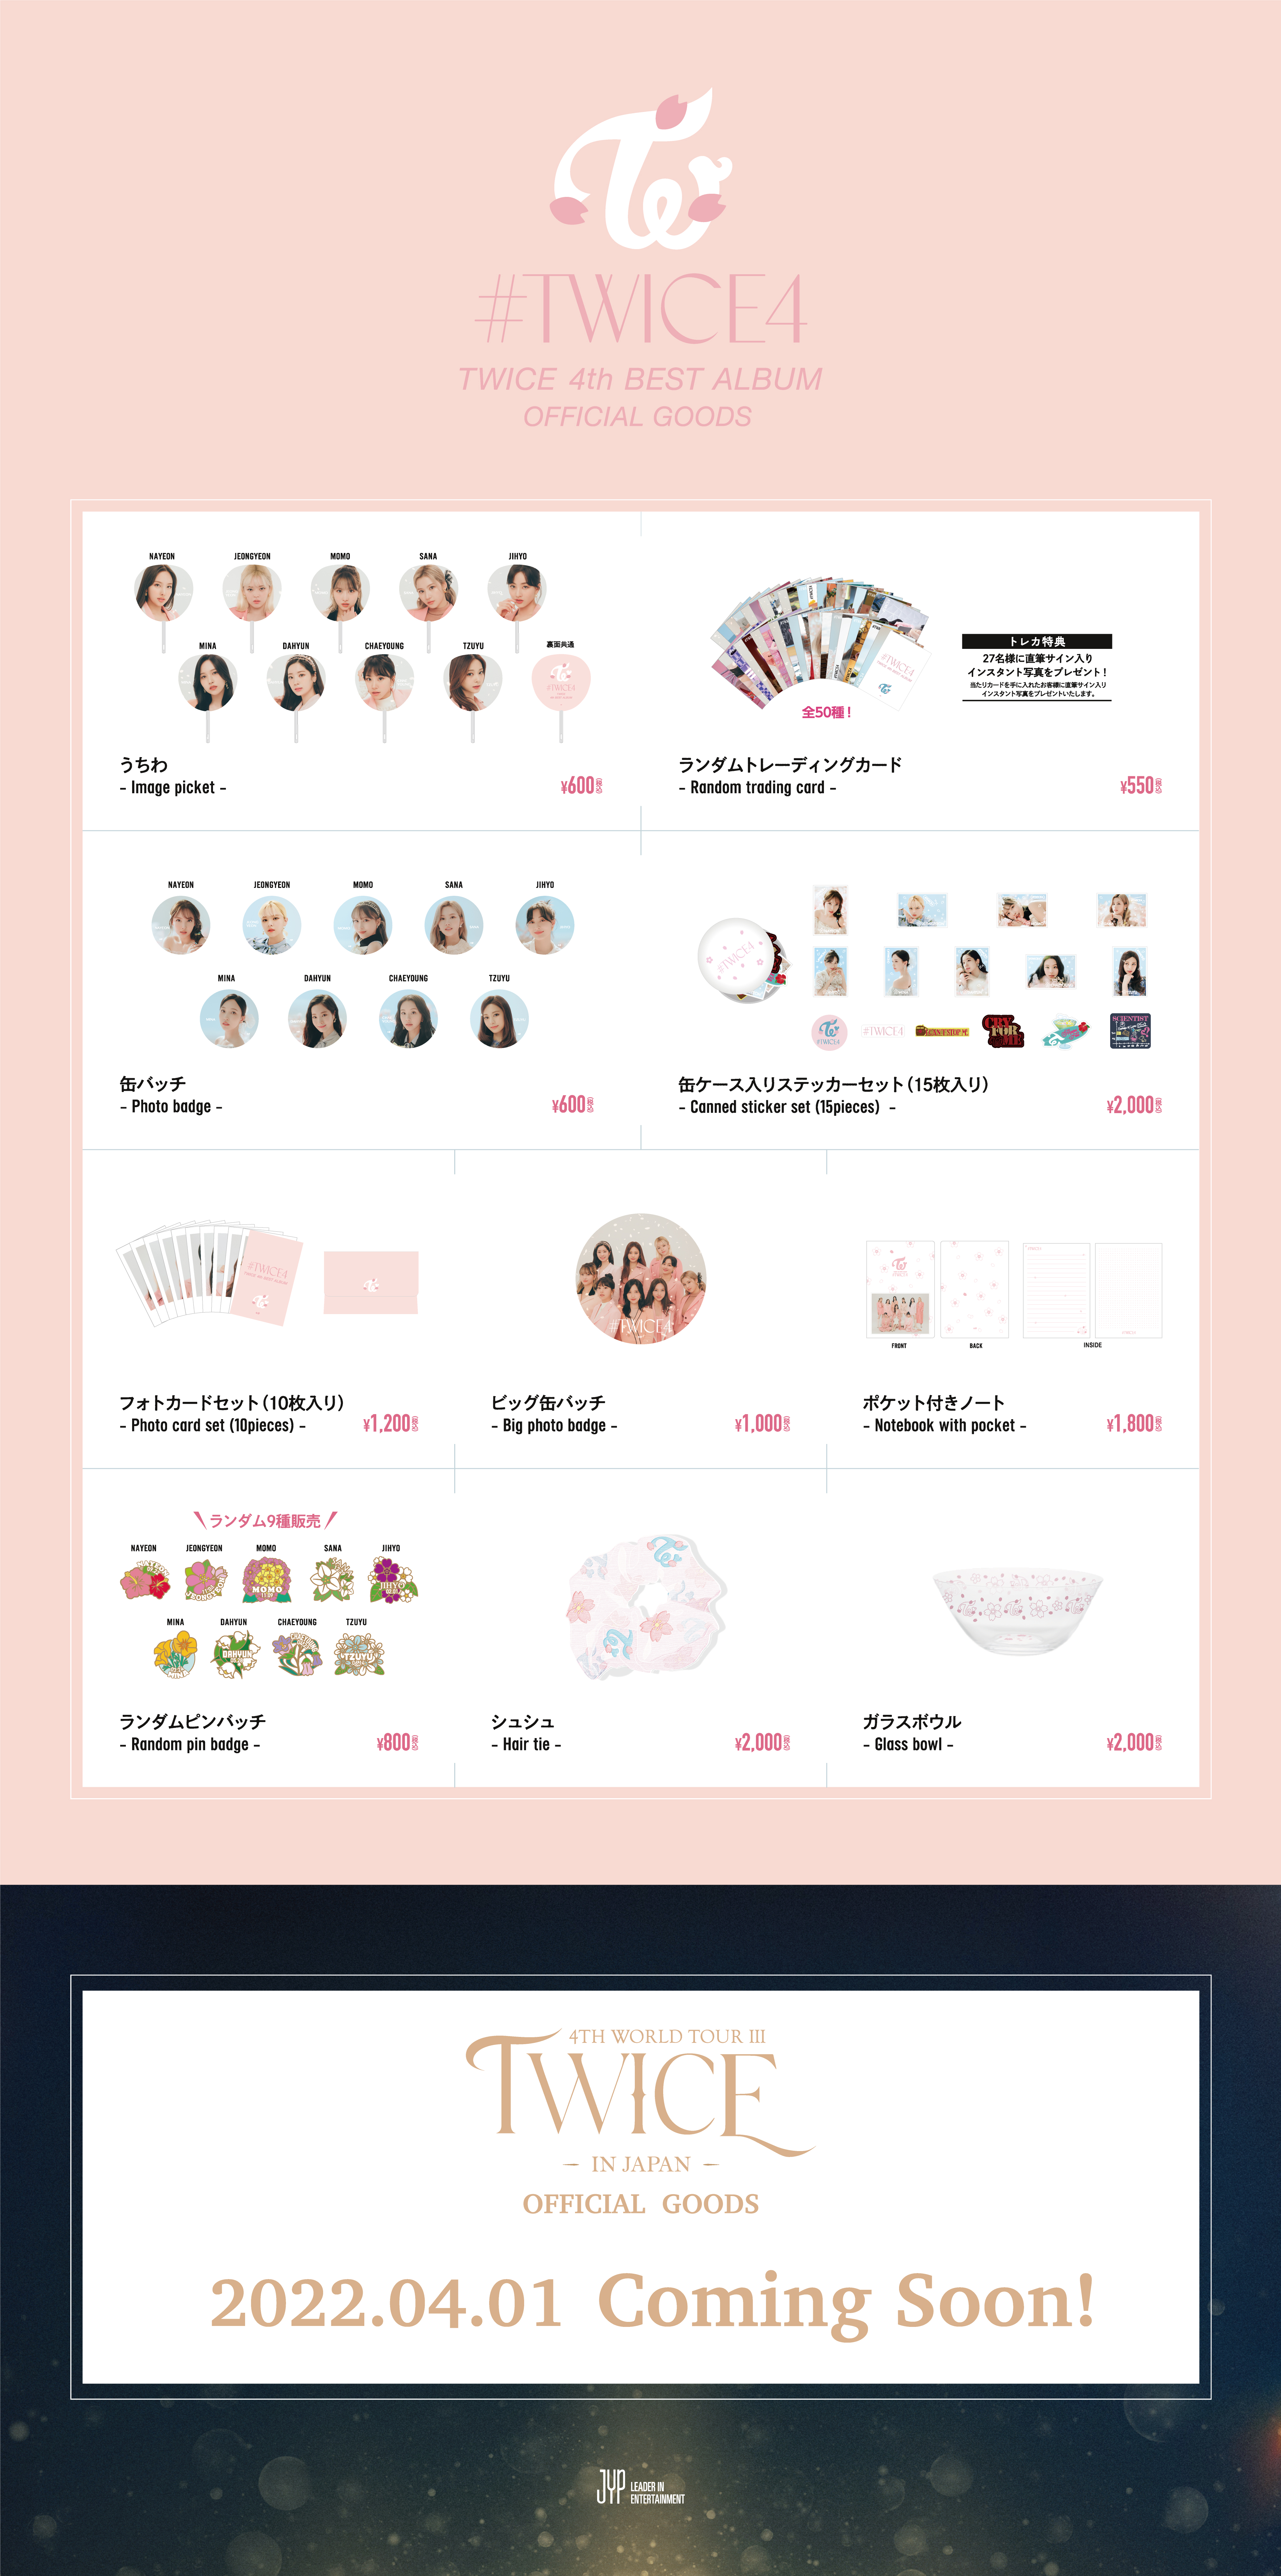 ONCE JAPAN 5th Anniversaryグッズ  TWICE 4th BEST ALBUM『#TWICE4』リリース記念スペシャルグッズ販売決定！  ｜TWICE OFFICIAL FANCLUB ONCE JAPAN